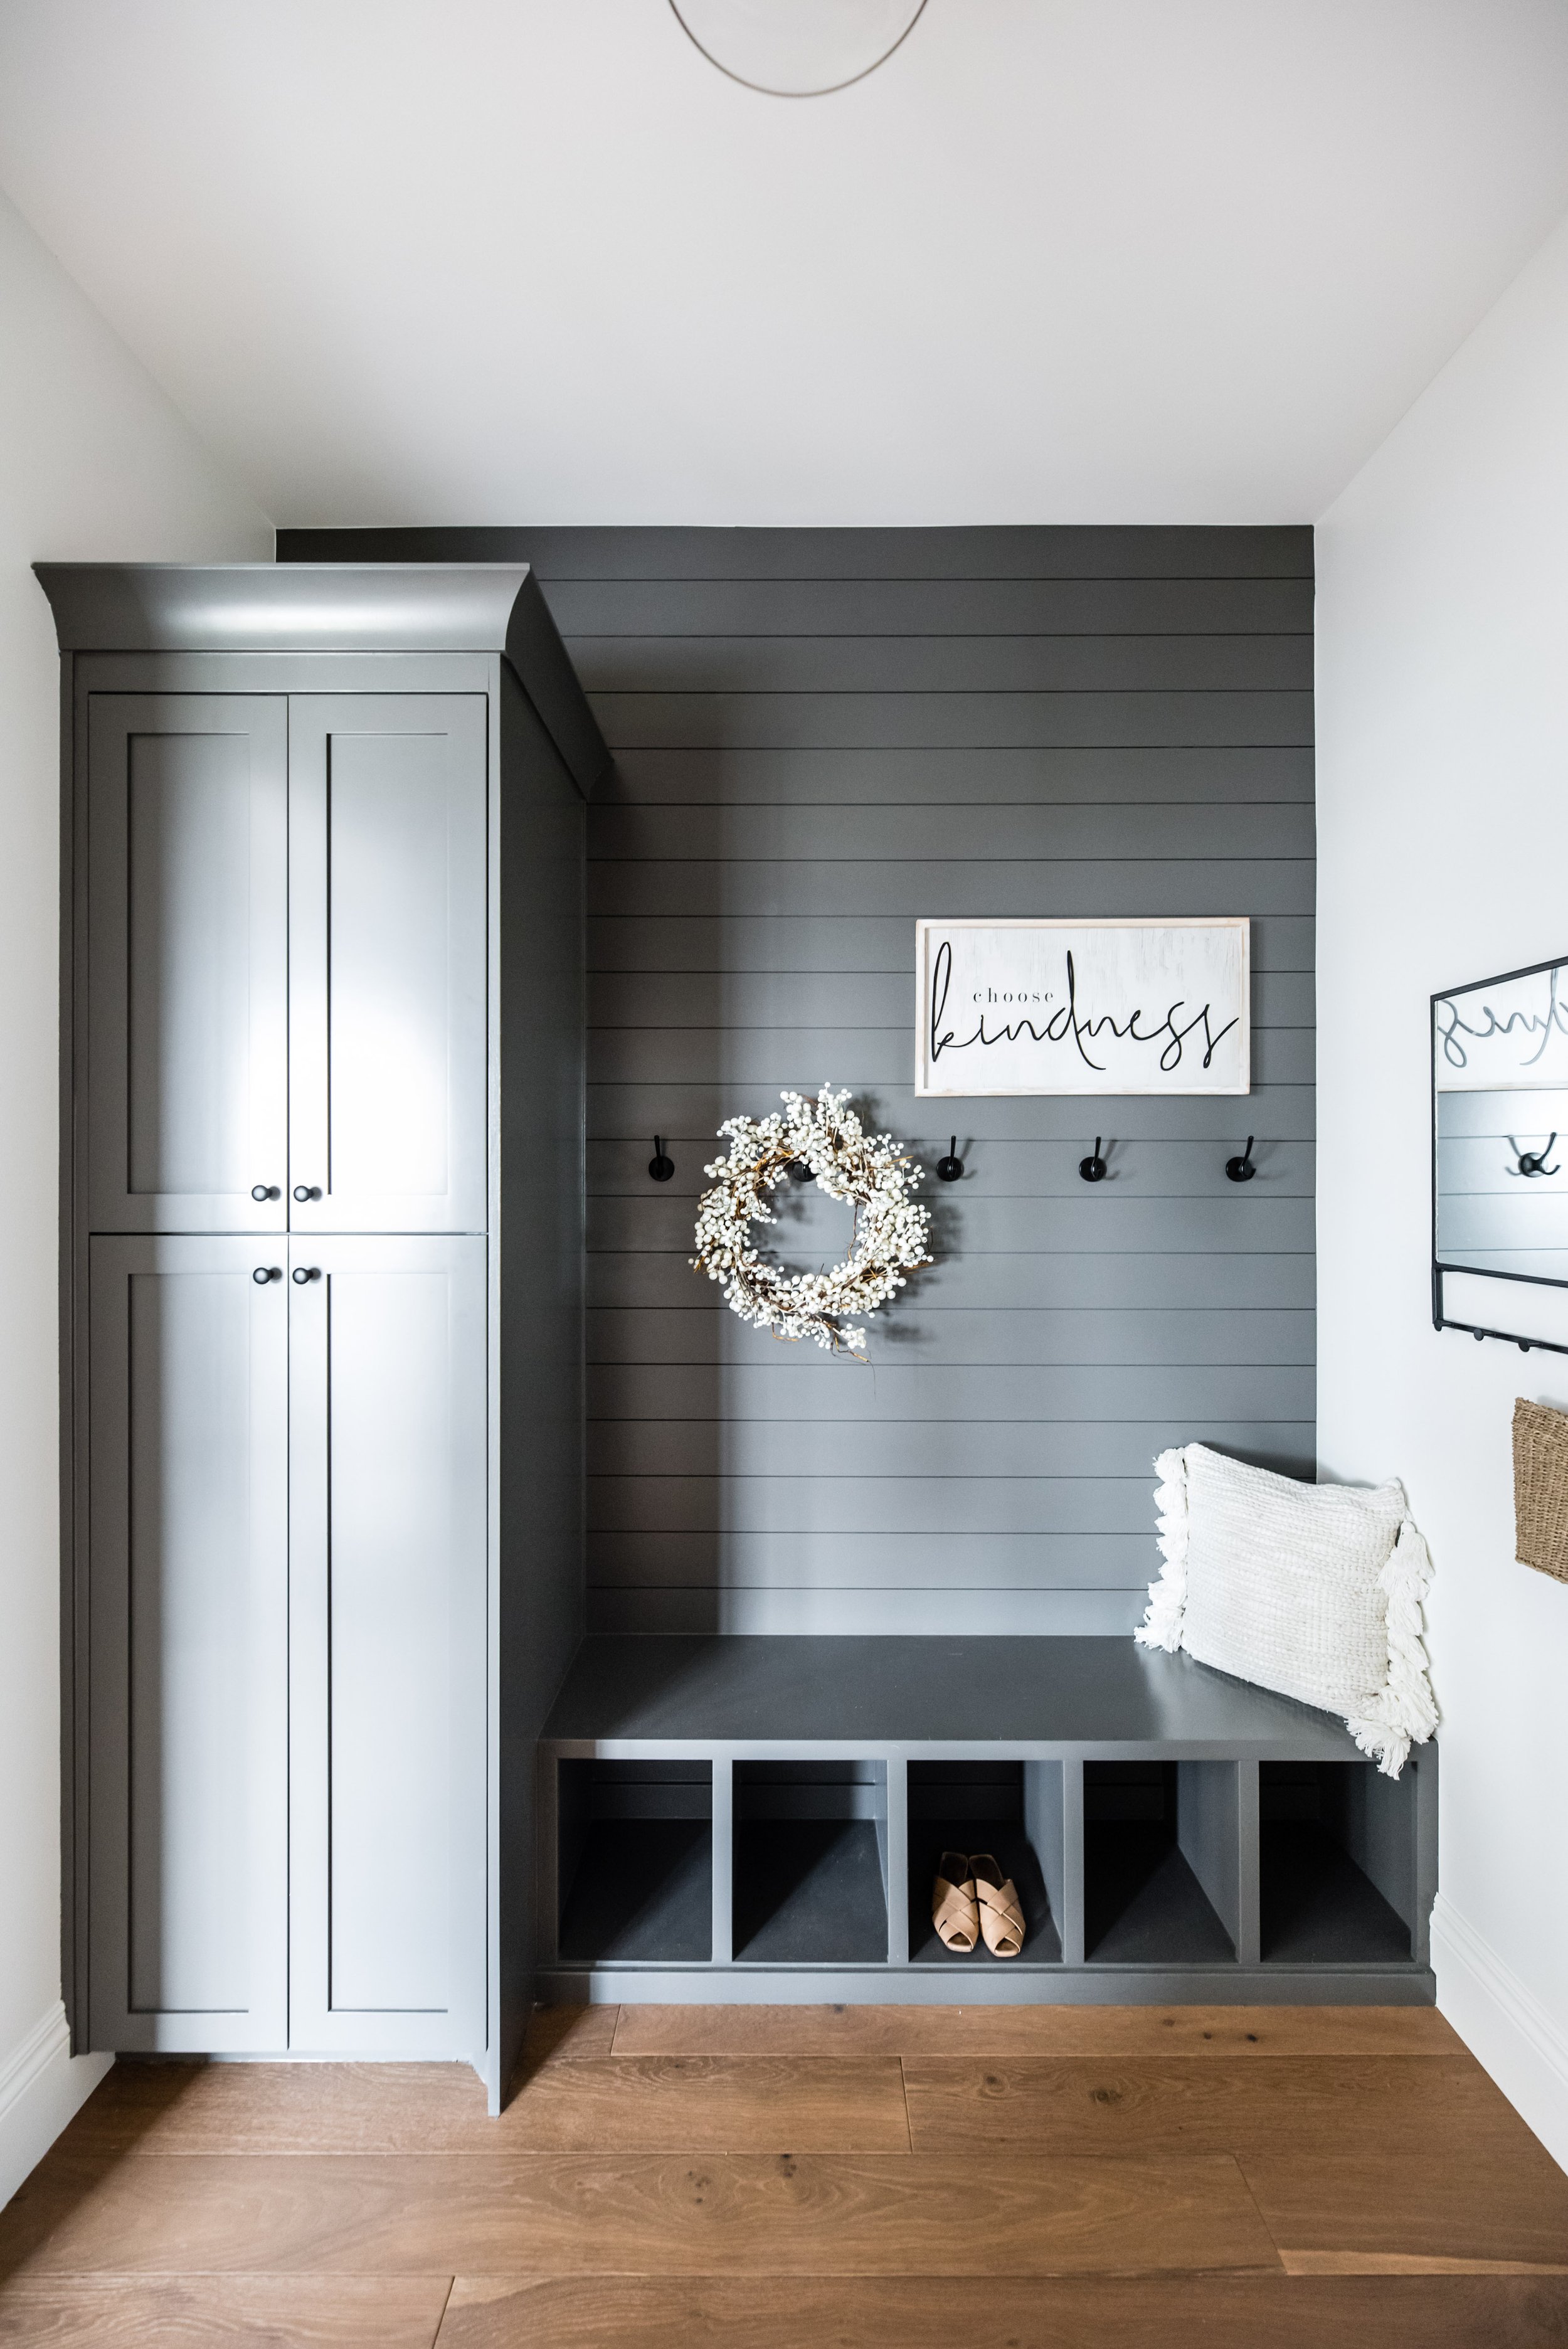  Building your dream home and at the cabinet choosing phase by Liz Powell Design in Northern Utah. Mudroom cabinets and customization garage nook #LizPowellDesign #InteriorDesignUtah #InteriorDesigner #buildingahome #cabinetry #dreamhome #interiors #